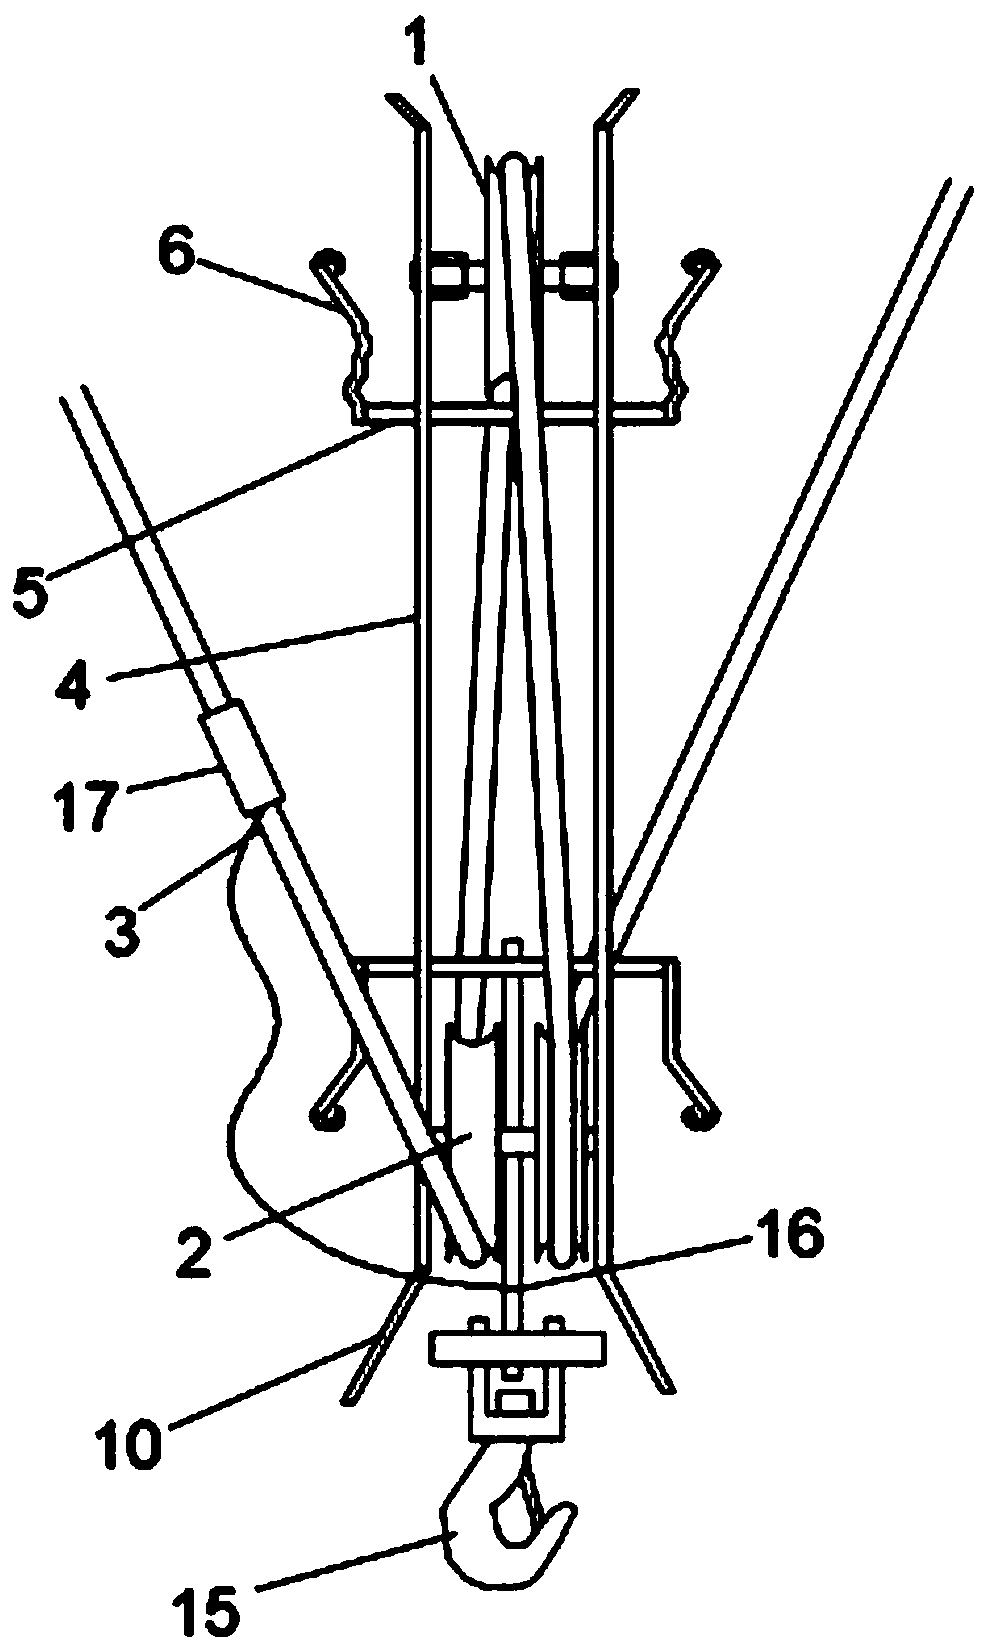 Integrated pulley block